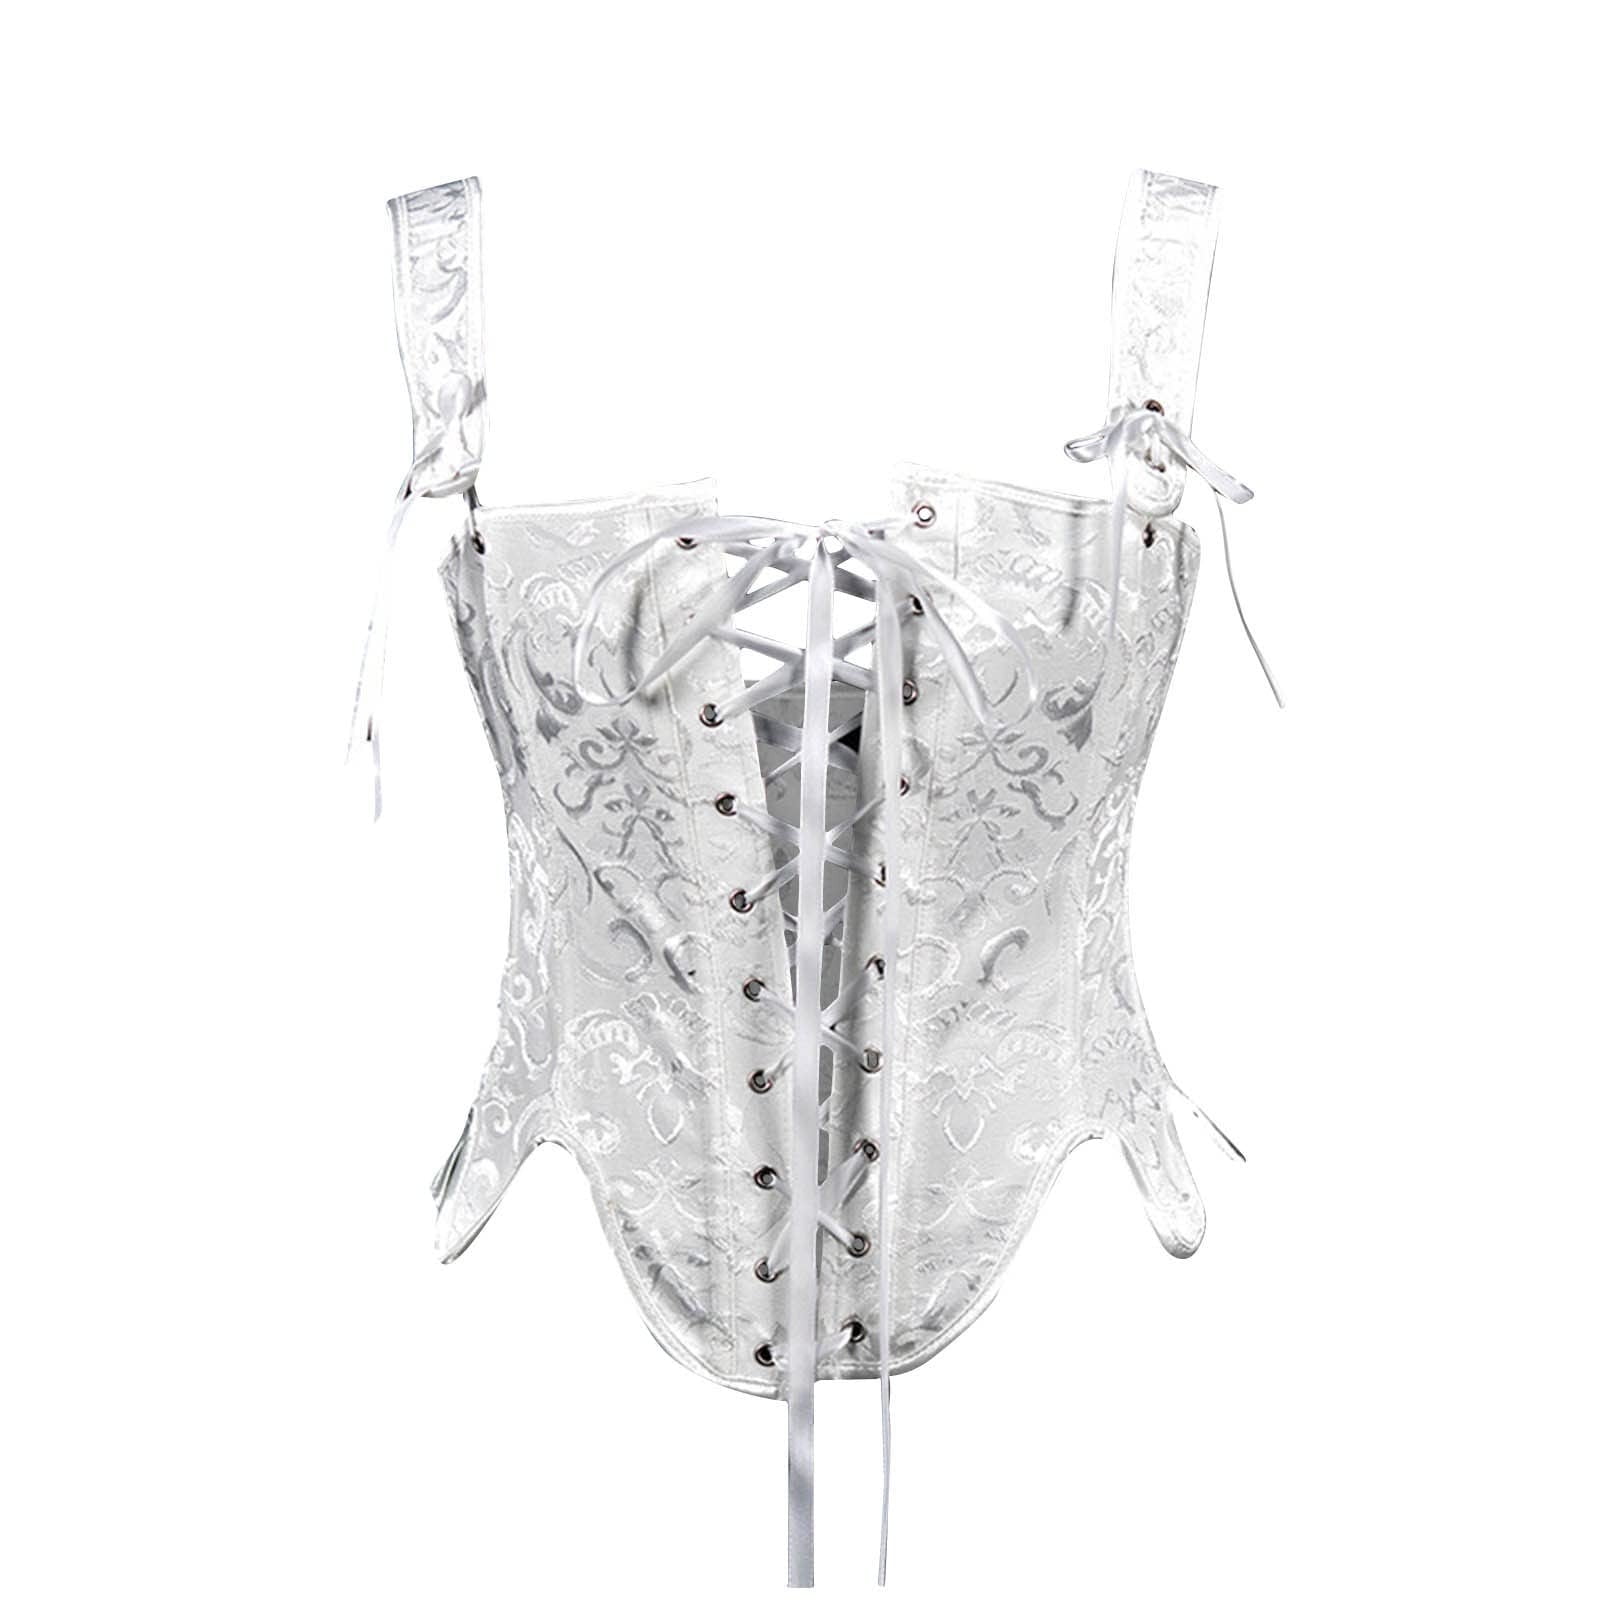 AXXD Corsets for Men Clearance,Lace-up Floral Print Fishbone Court